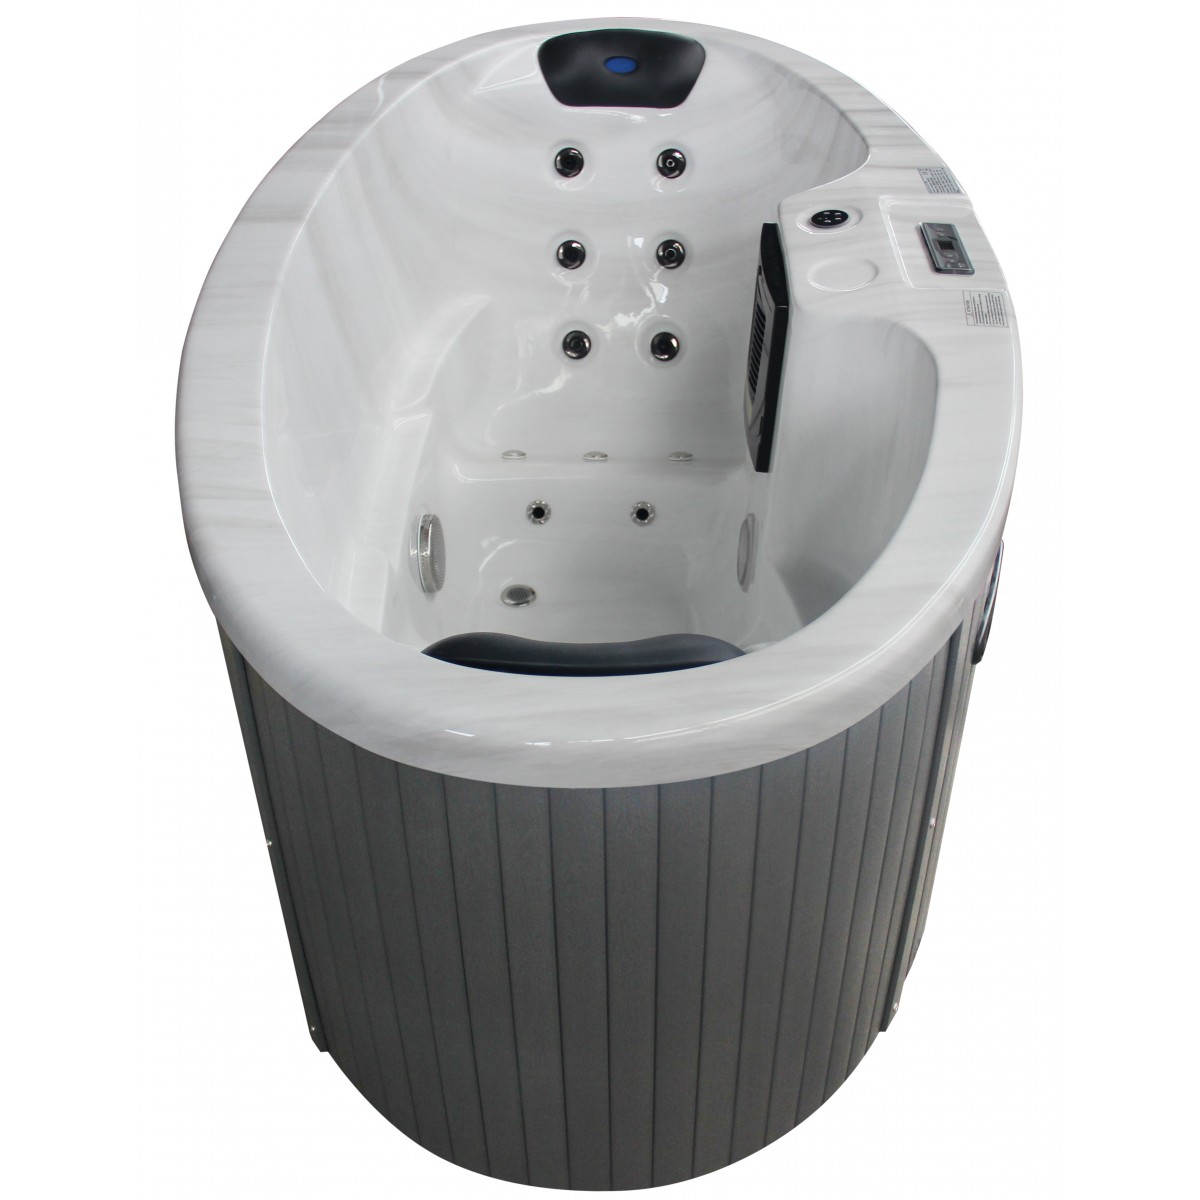 2 person hot tub clearance        <h3 class=